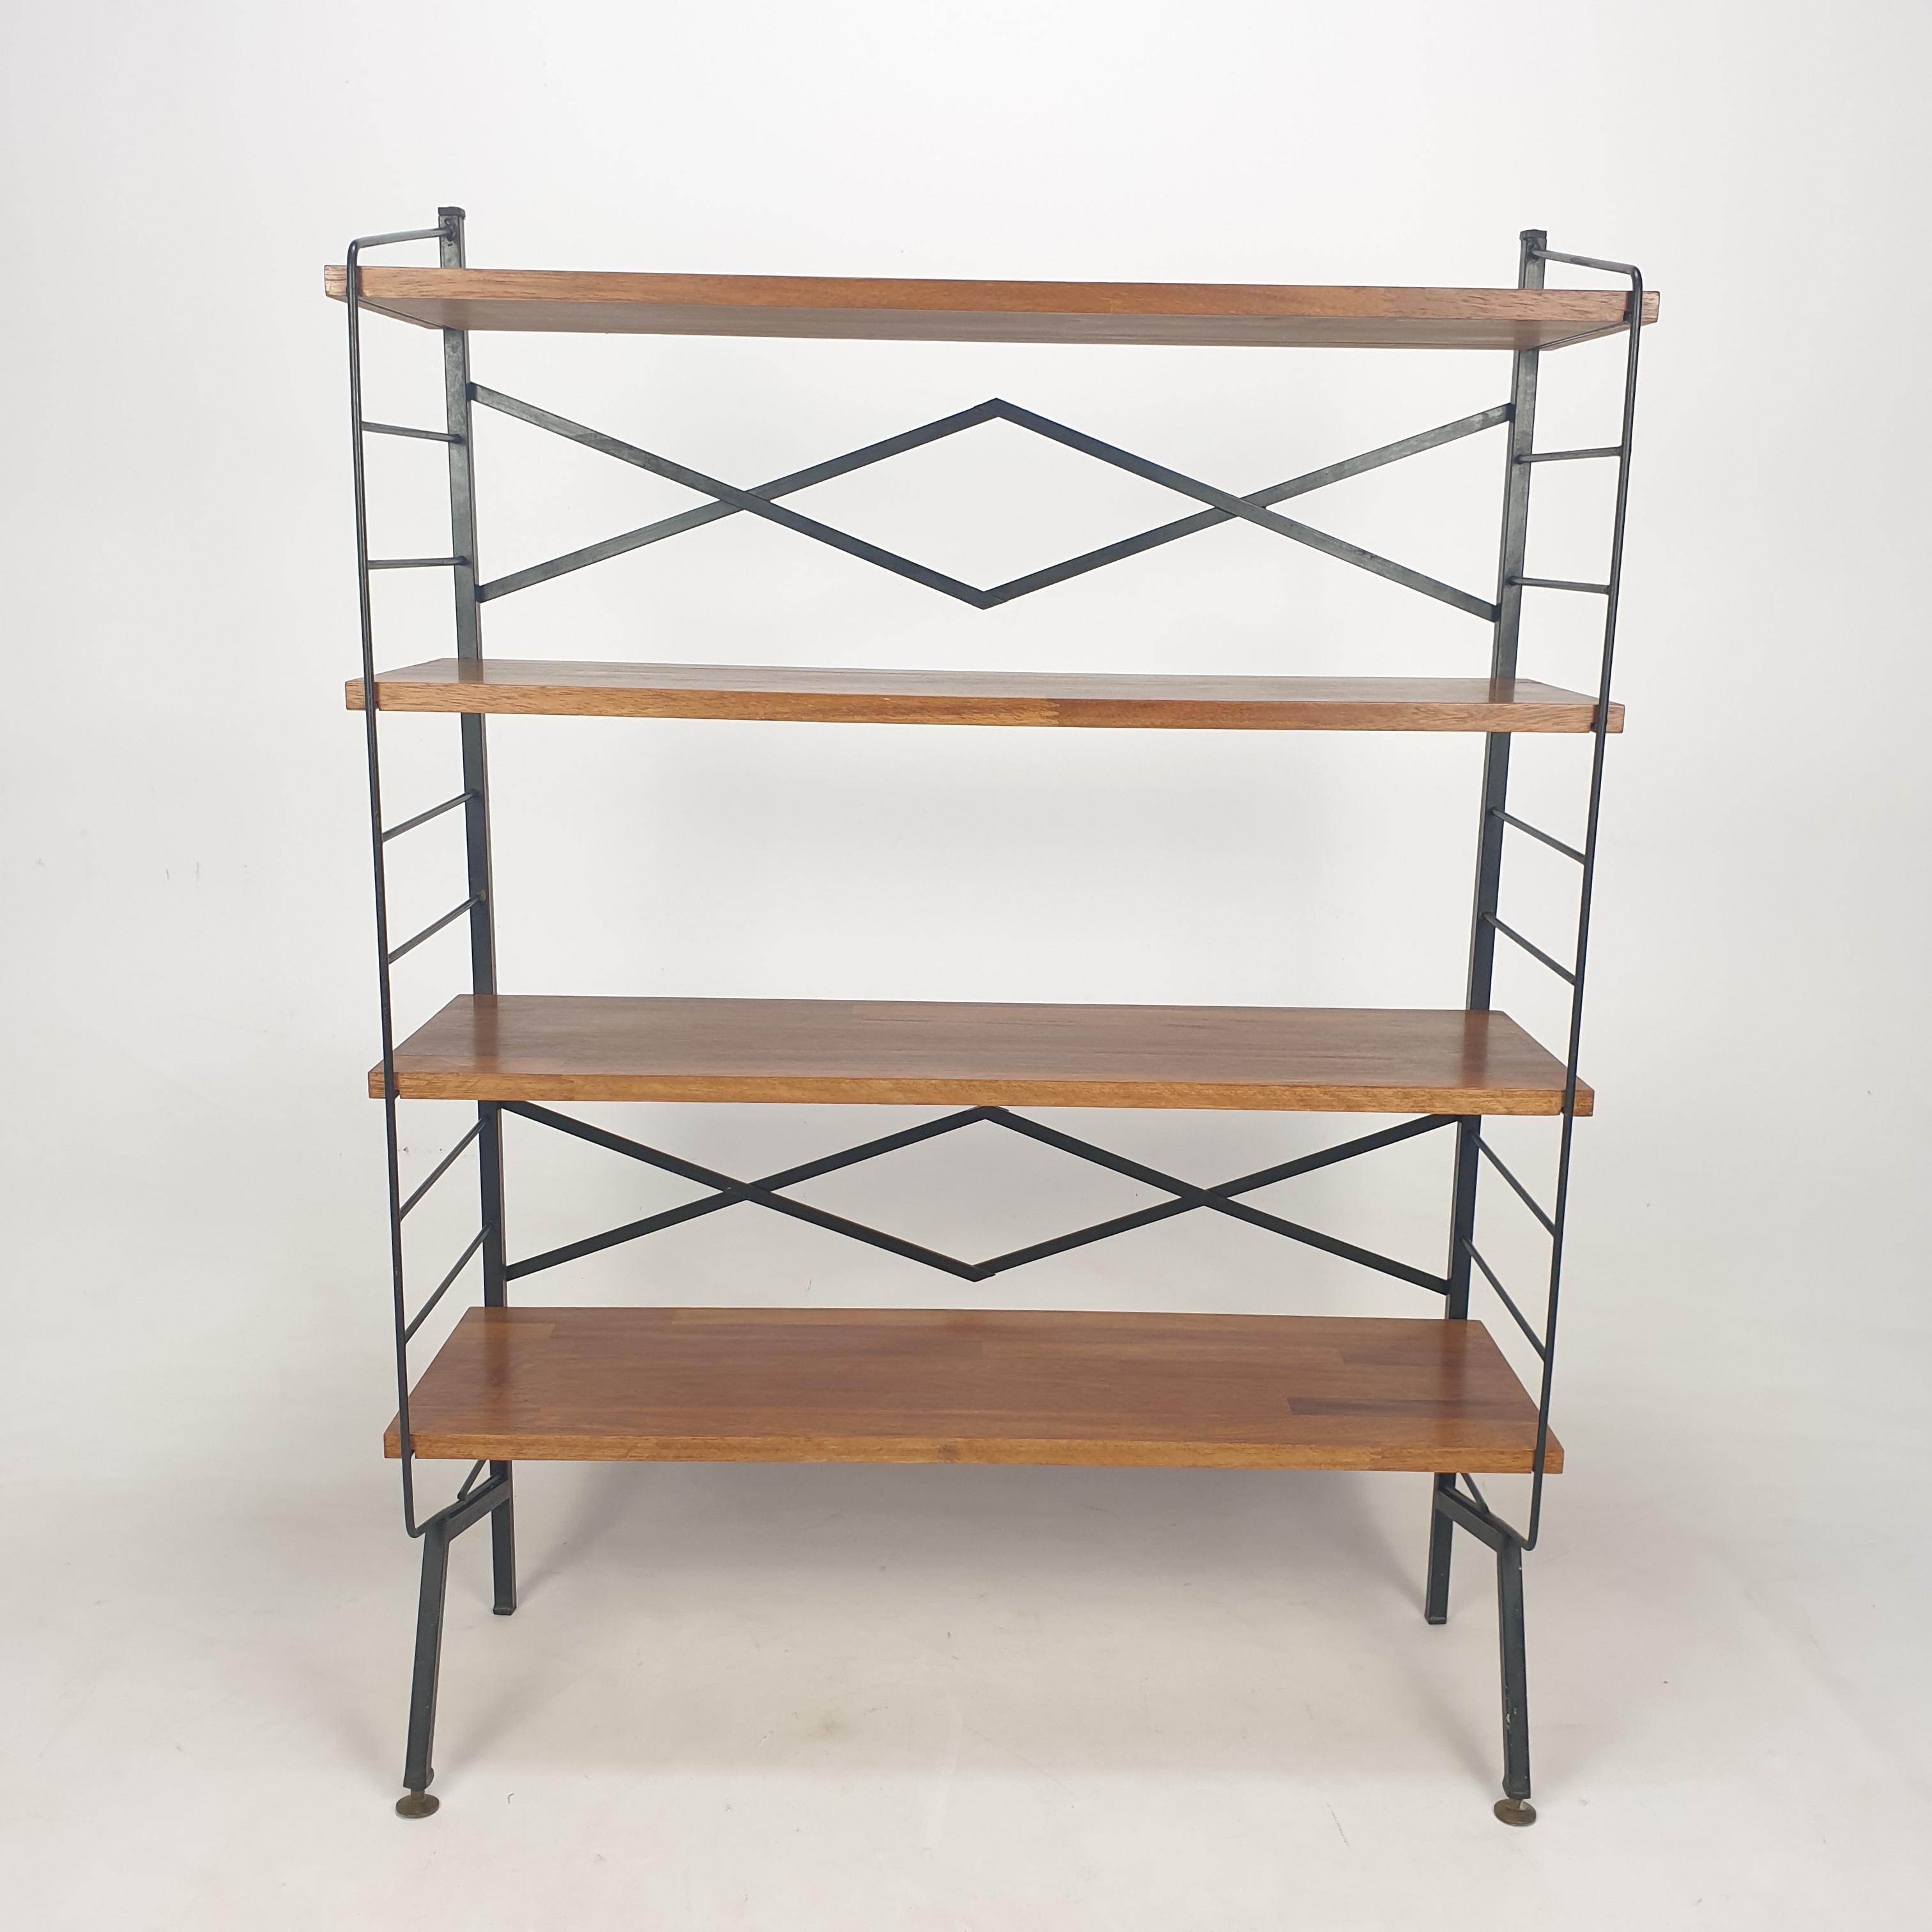 Very nice free standing shelve system, fabricated in Italy in the 50's.

4 wooden shelves with a black painted metal system and brass feet.

It is very easy to disassemble with 8 screws.